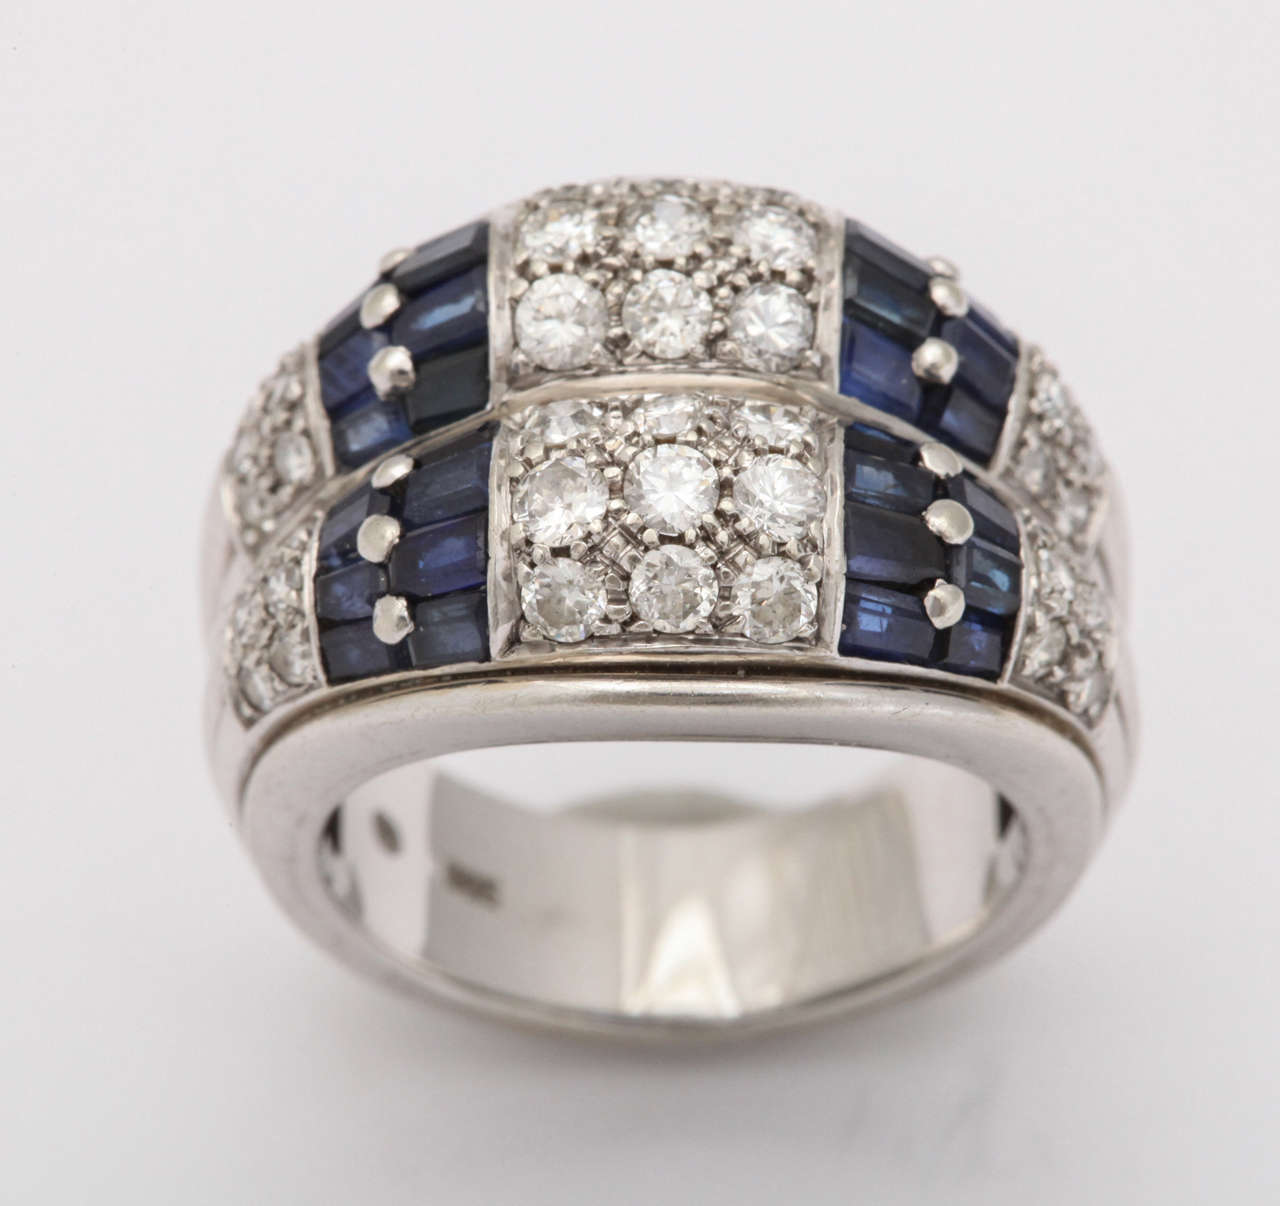 Beautiful 14kt White Gold double Band each set with three rows of prong set full cut - clean white Diamonds  - a total of 18 Stones & separated by a  row of faceted Sapphire Baguettes - each row set with sixteen Sapphires.  The quality & intensity